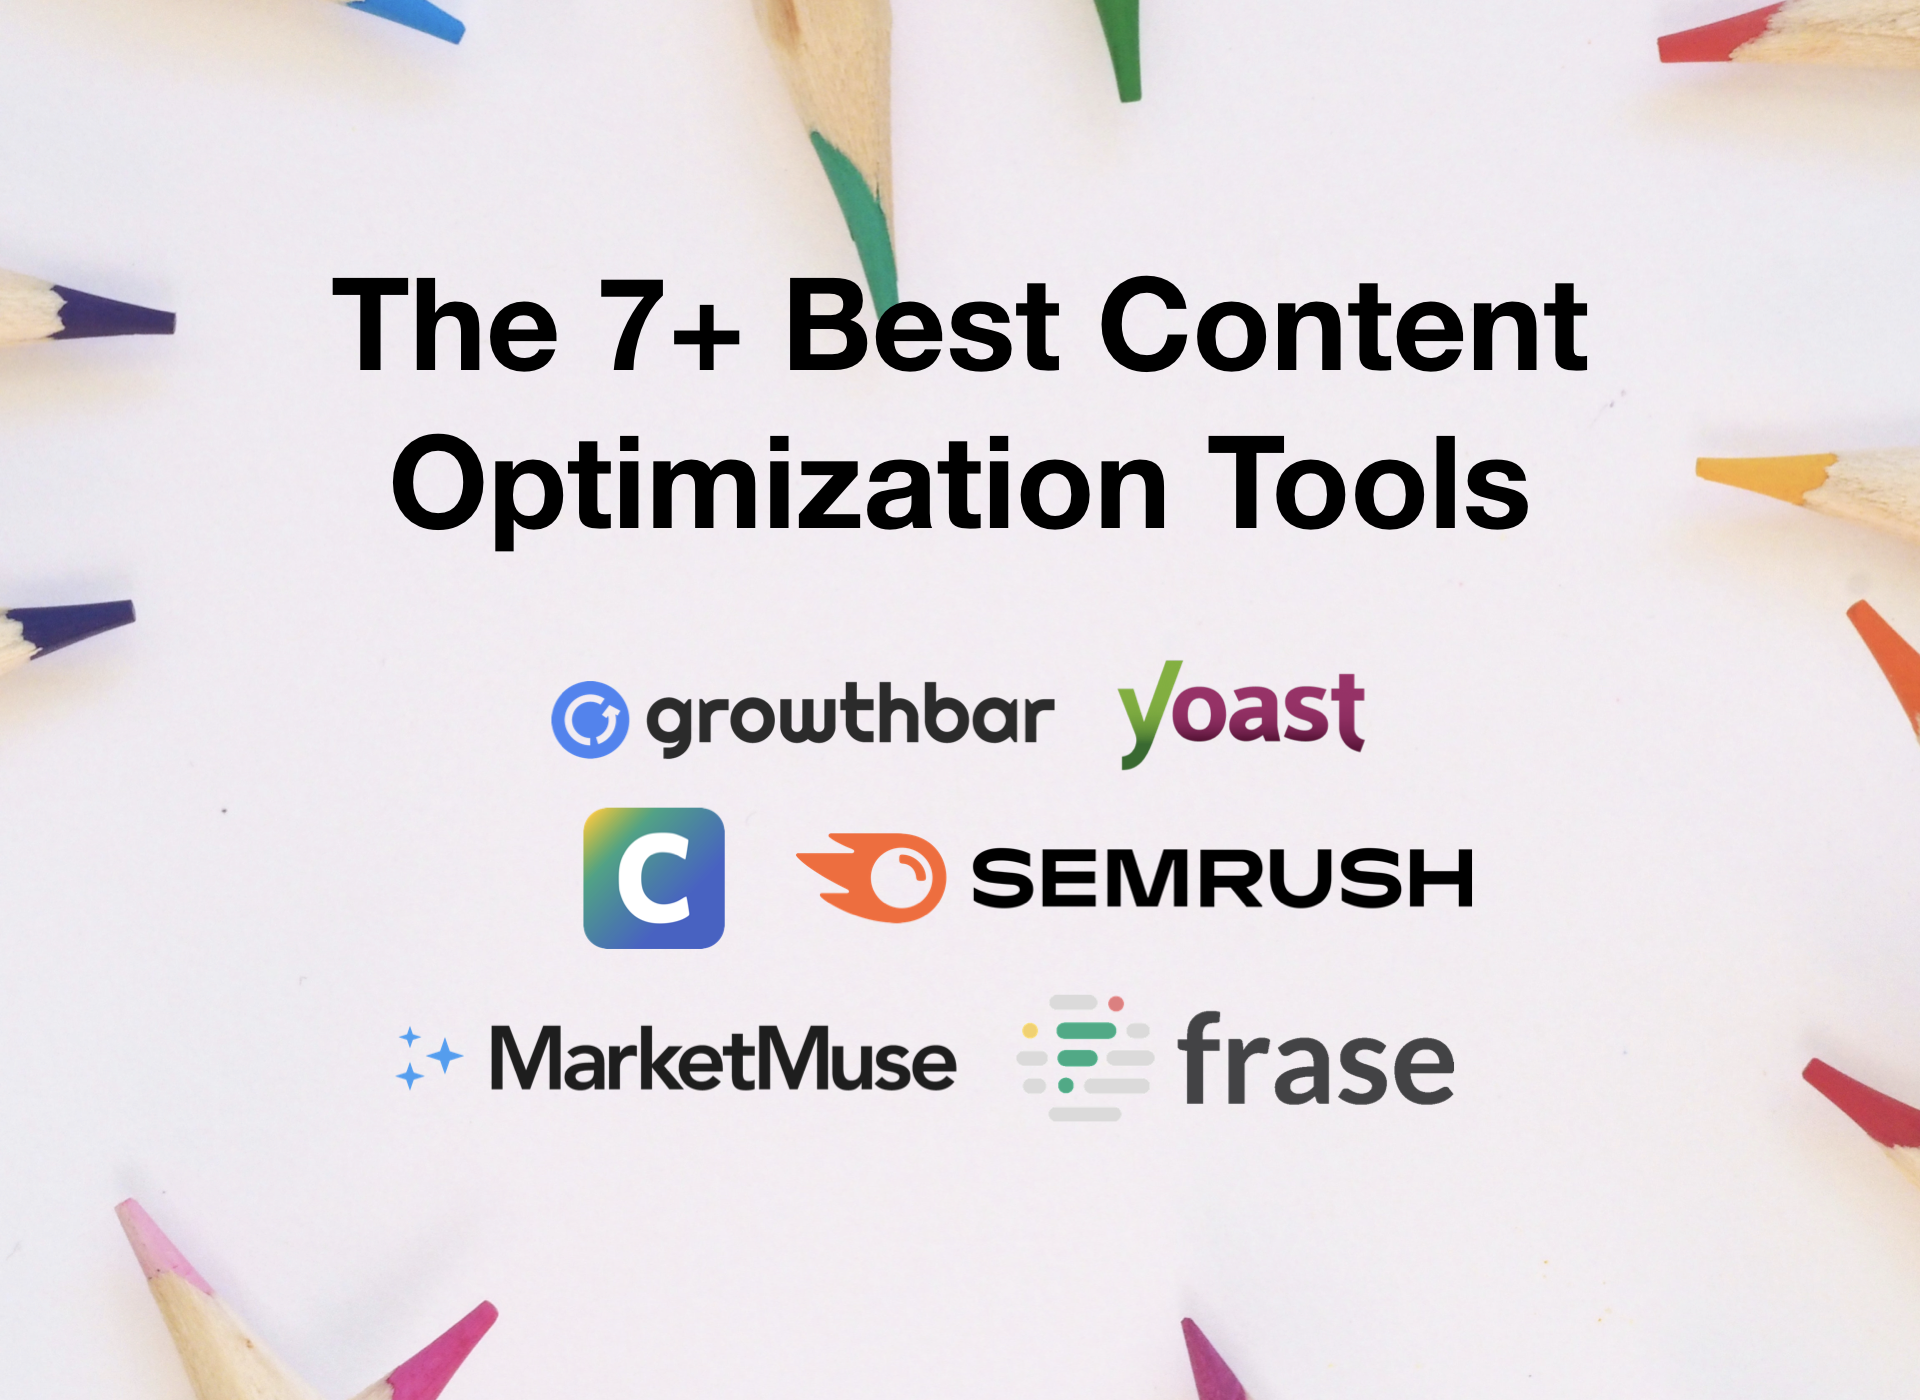 The 7+ Best Content Optimization Tools to Optimize for SEO